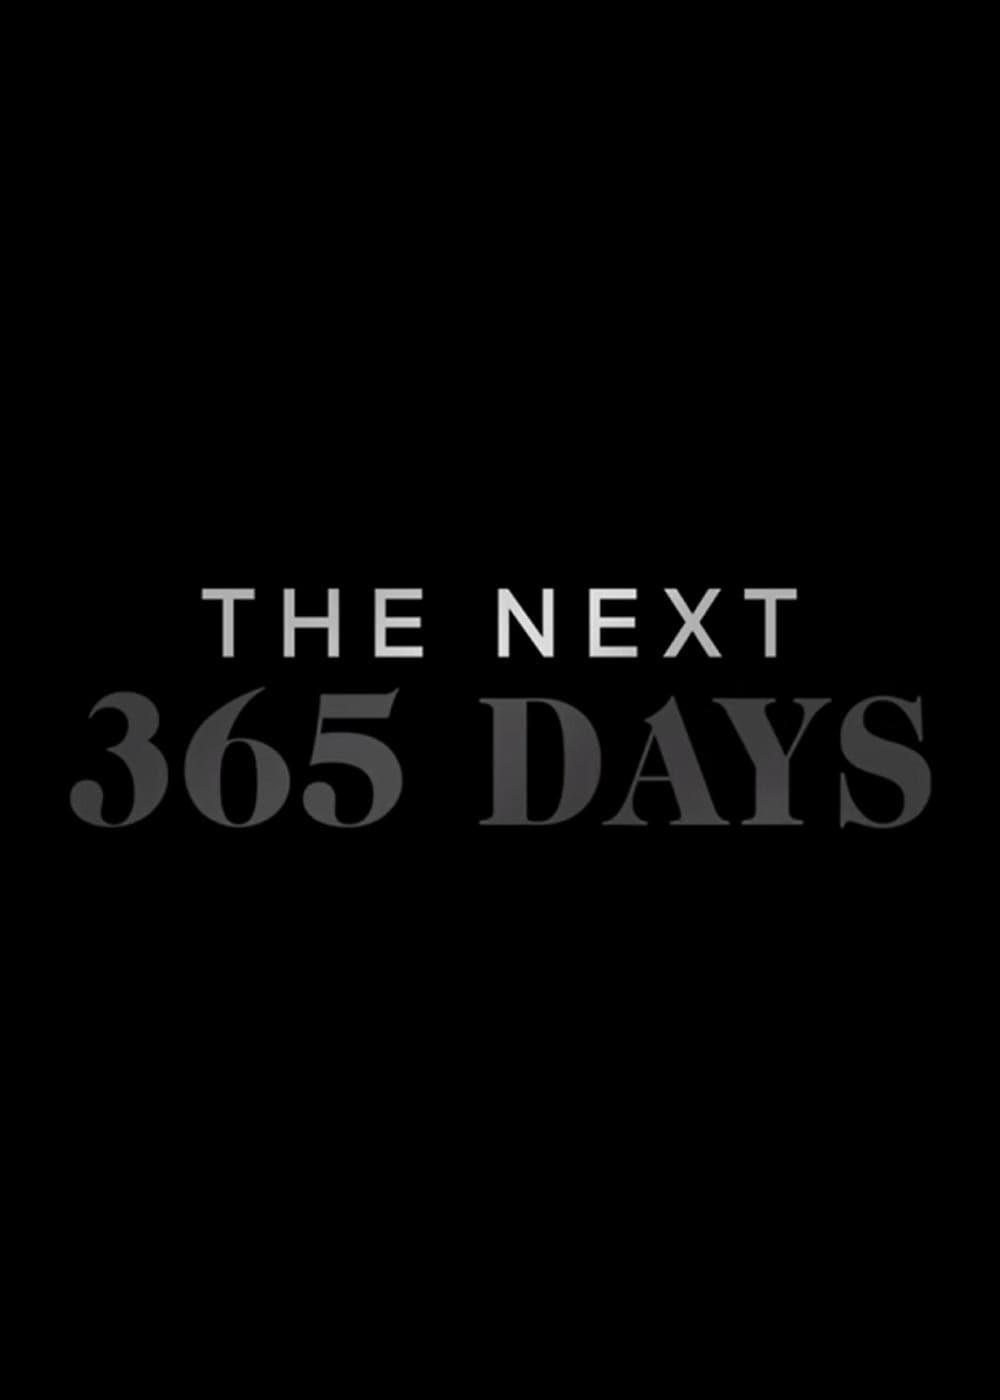 The Next 365 Days Movie (2022) Release Date, Review, Cast, Trailer